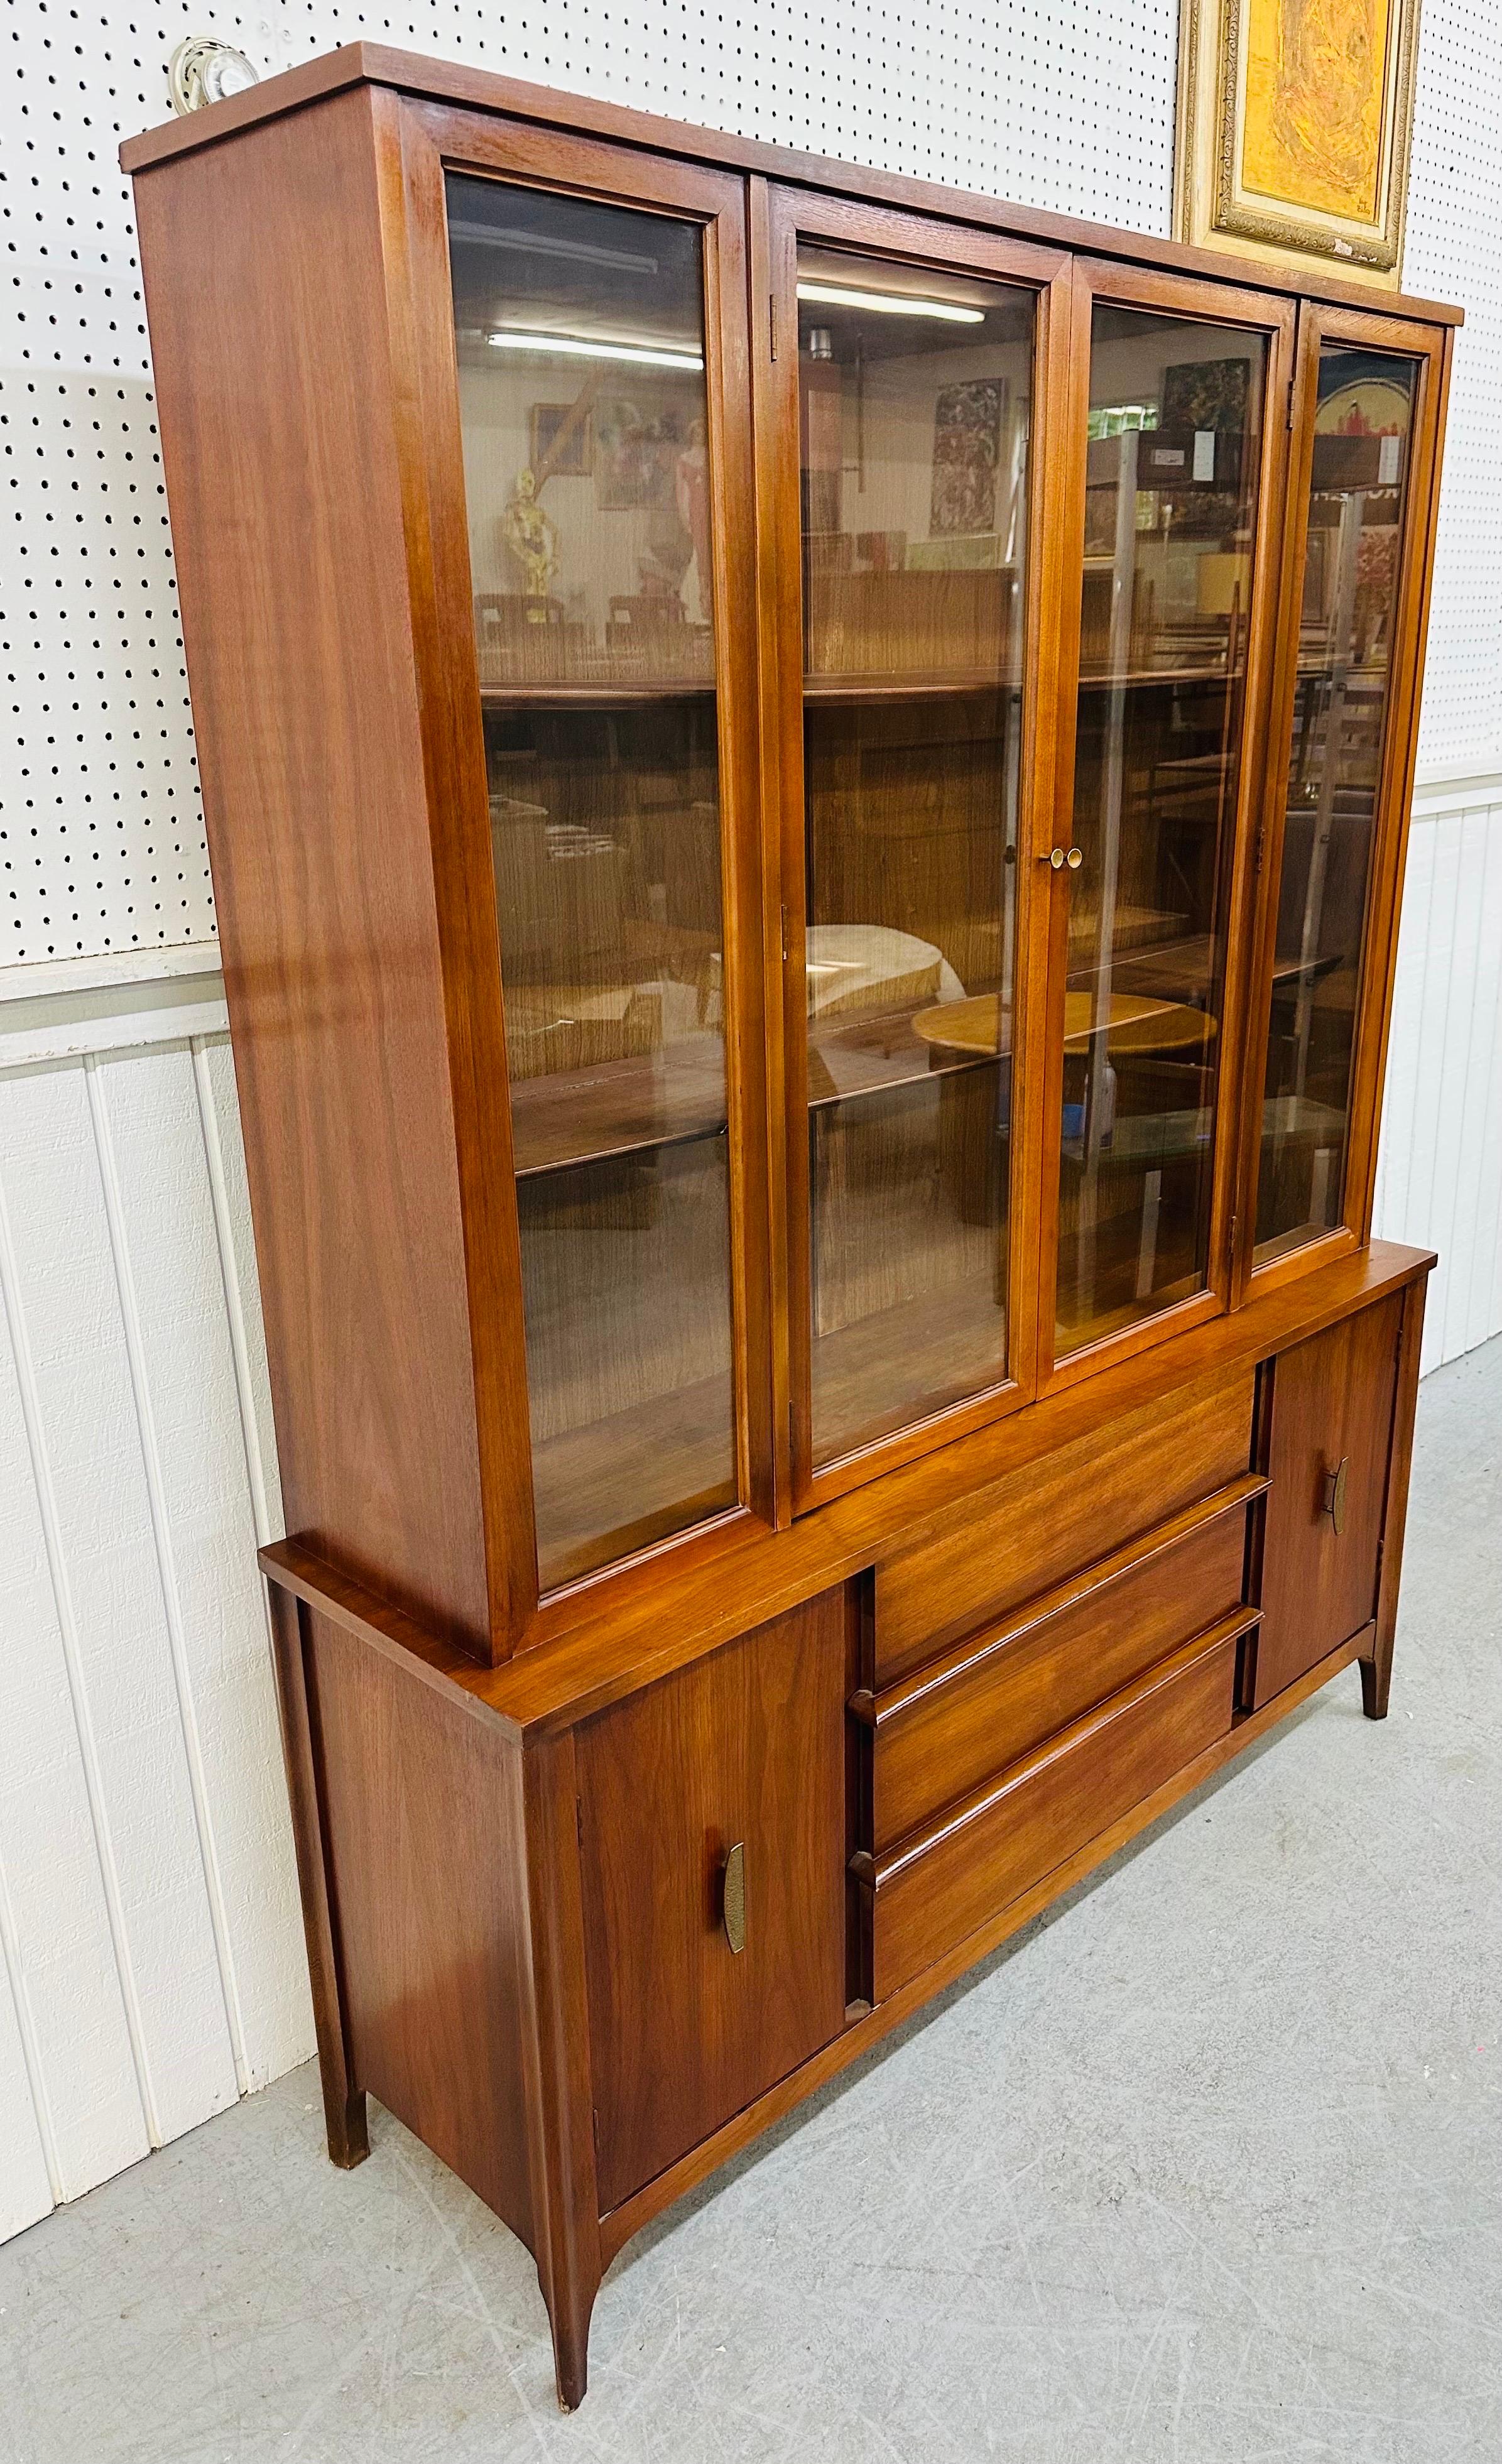 This listing is for a Mid-Century Modern Walnut China Cabinet. Featuring a straight line design, two doors that open up to shelving space, two doors with original hardware that open up to more storage space, three large center drawers, and a